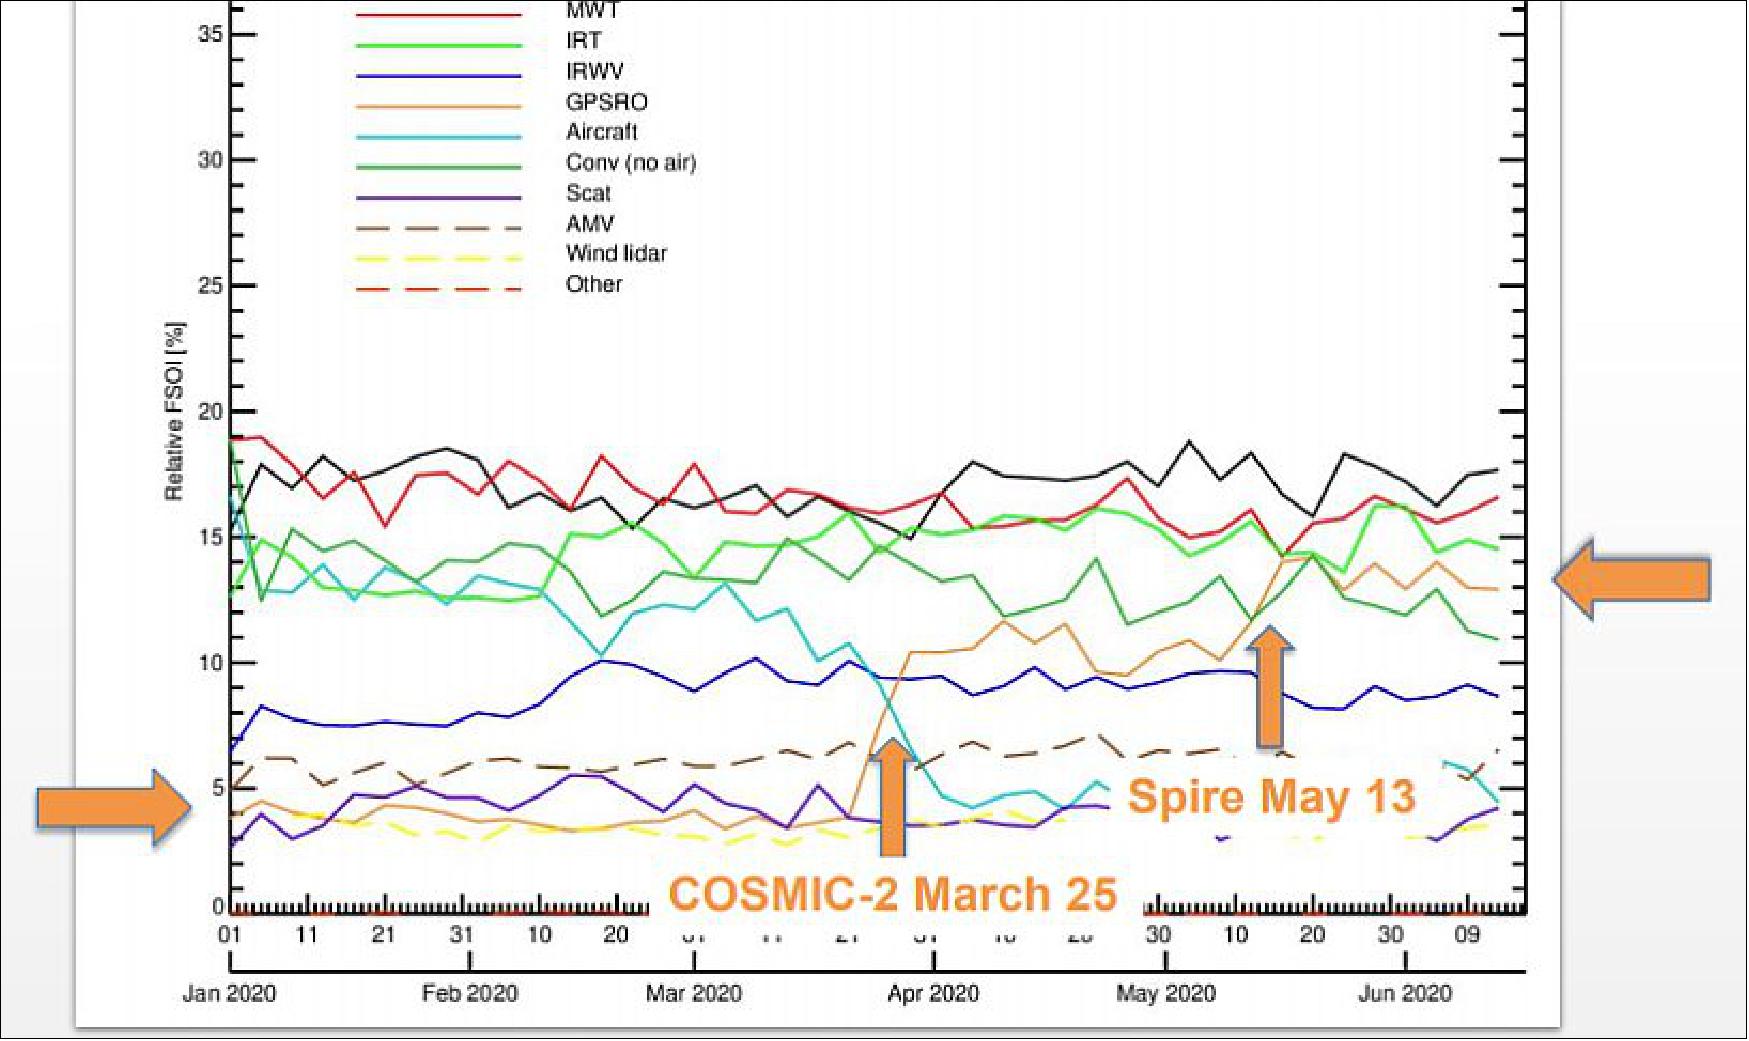 Figure 7: The ECMWF (European Centre for Medium-Range Weather Forecasts) created this Forecast Sensitivity Observation Impact chart, which notes the relative importance of various datasets in reducing forecast errors. The light blue line shows the declining impact of airborne sensors as air travel declined during the COVID-19 pandemic. The orange line shows the growing importance of radio occultation data with the addition of data from the second Constellation Observing System for Meteorology, Ionosphere and Climate in March and Spire Global data in May (image credit: ECMWF)